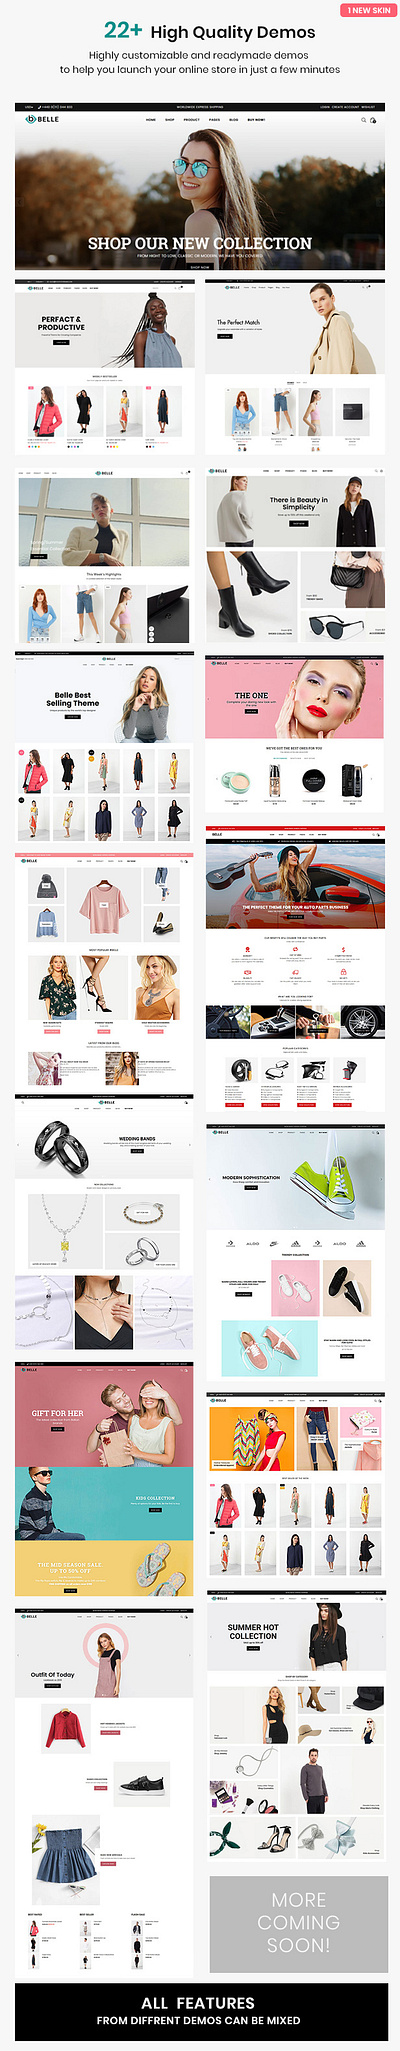 Belle - Clothing and Fashion Shopify Theme OS 2.0 ecommerce templates template